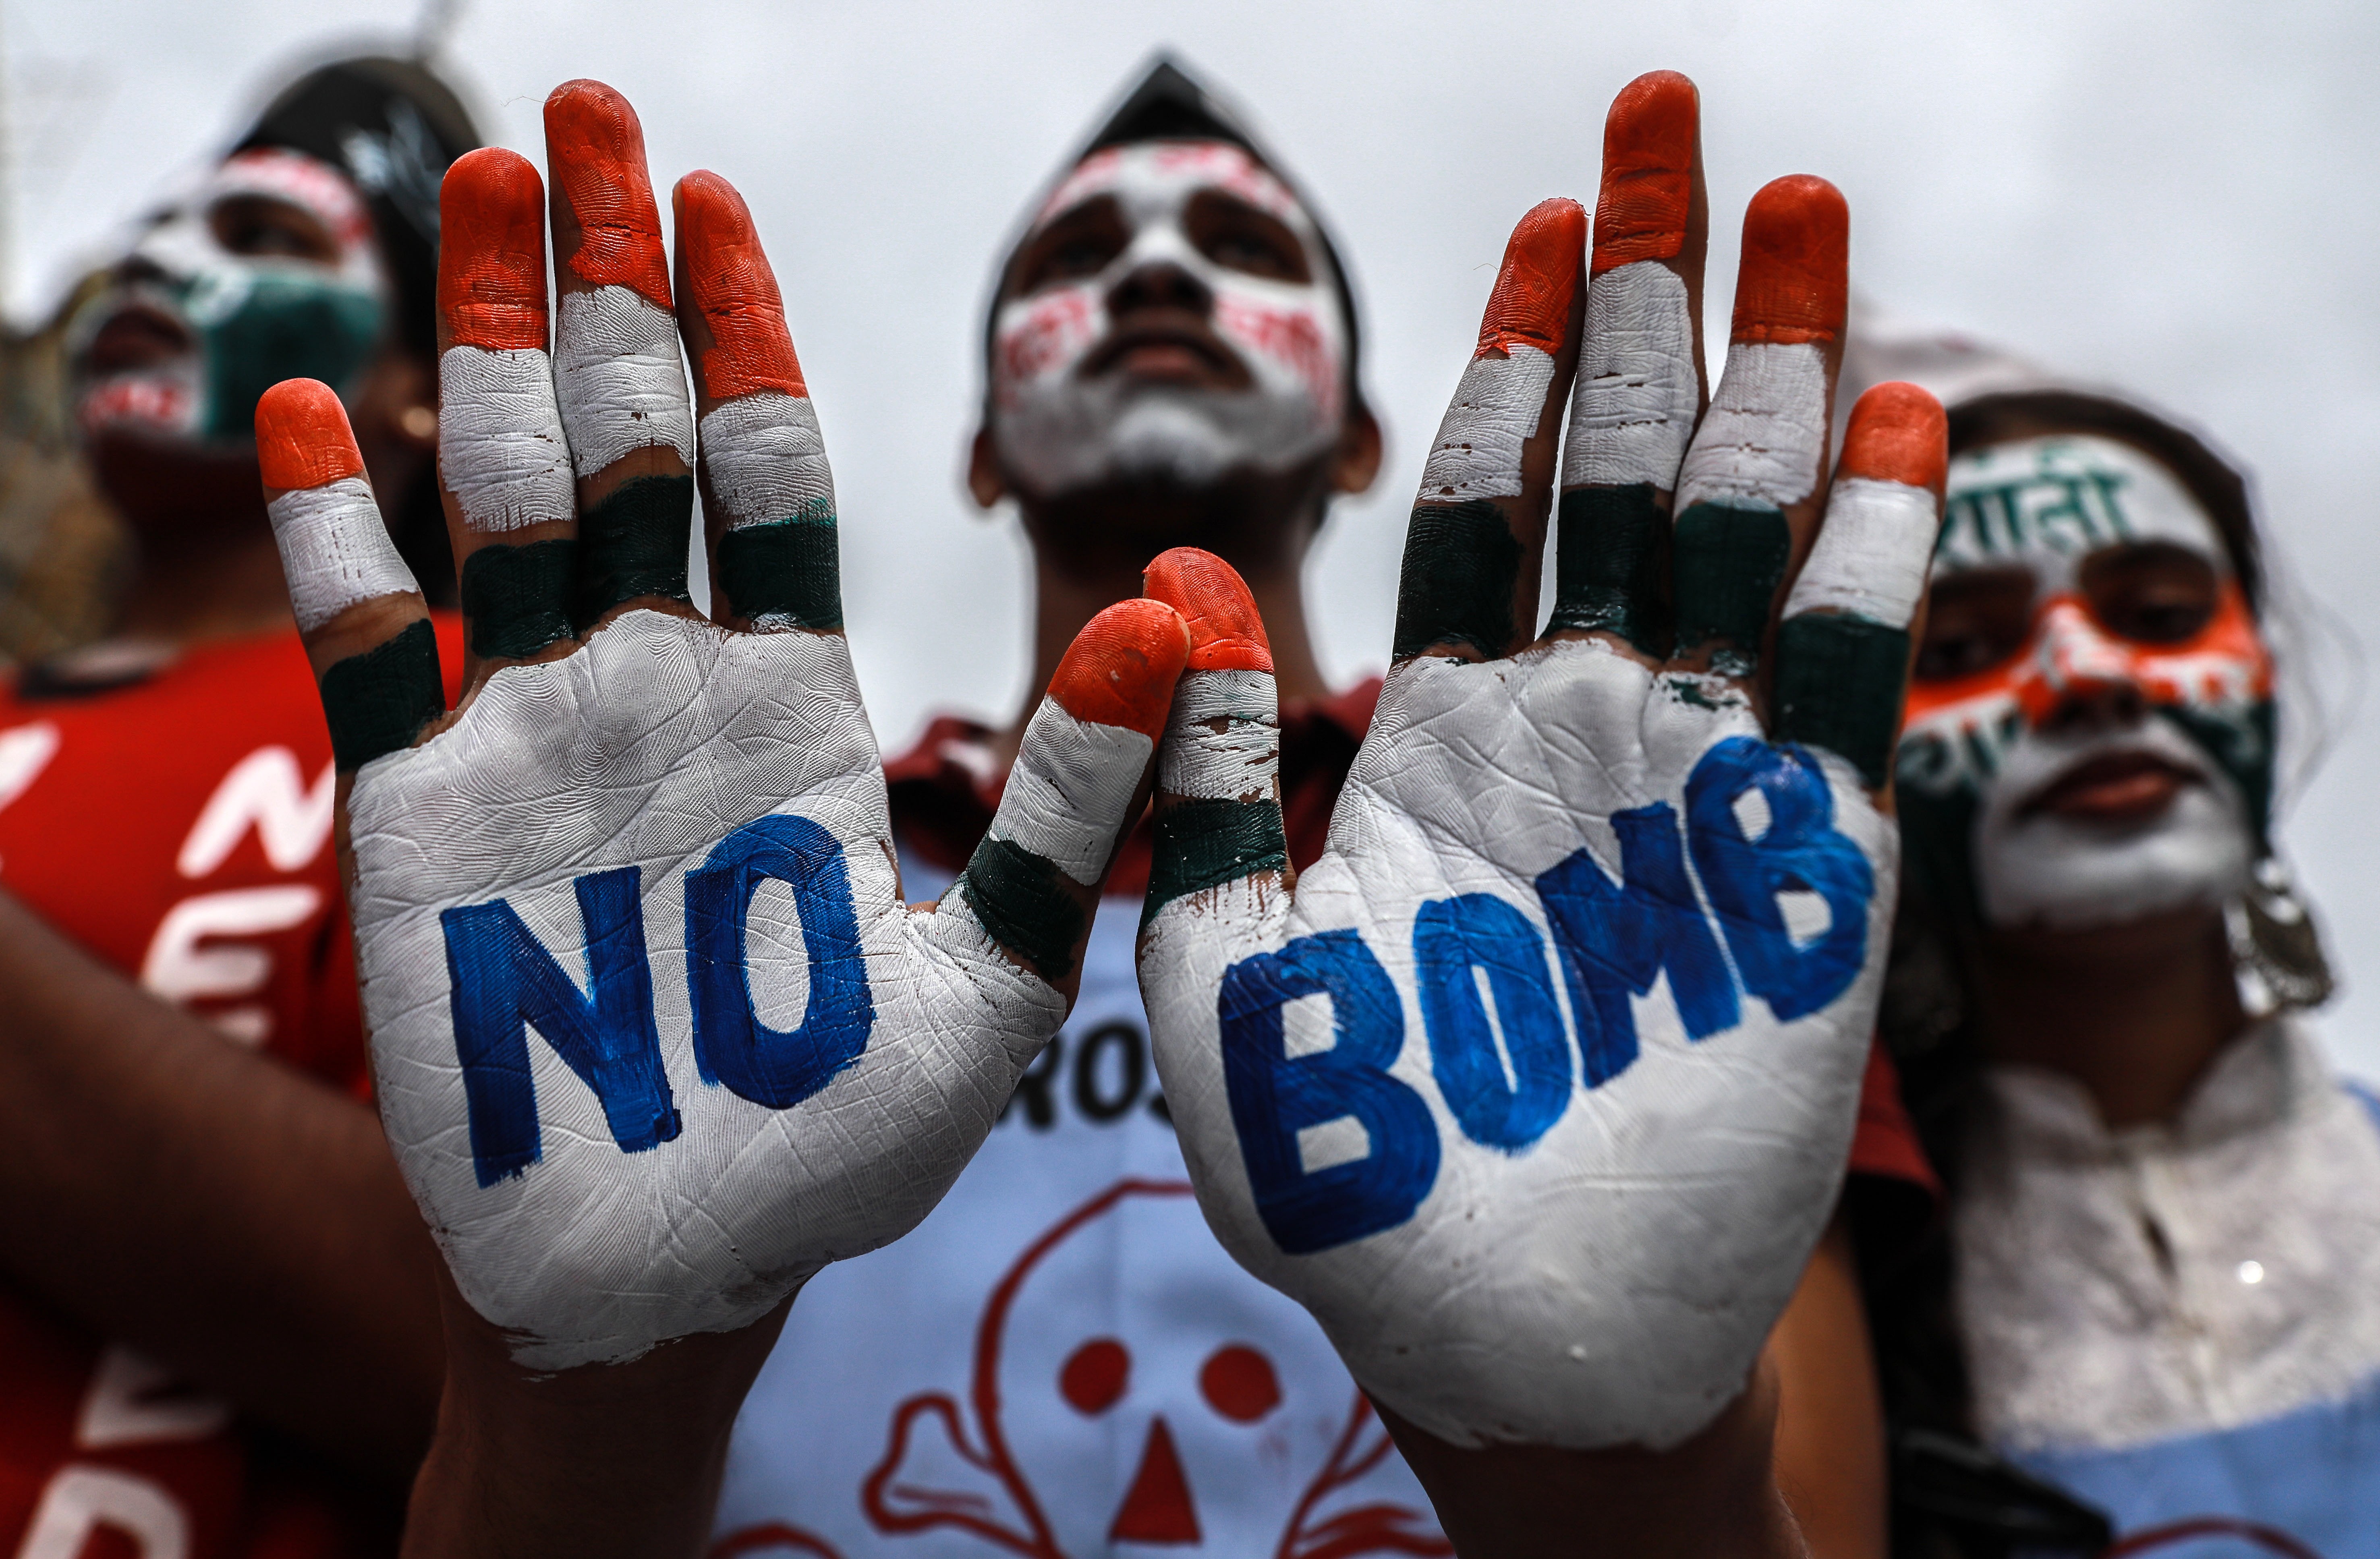 An Indian student with peace messages written on his hands takes part in a “Hiroshima Day” peace rally in Mumbai. Photo: EPA-EFE